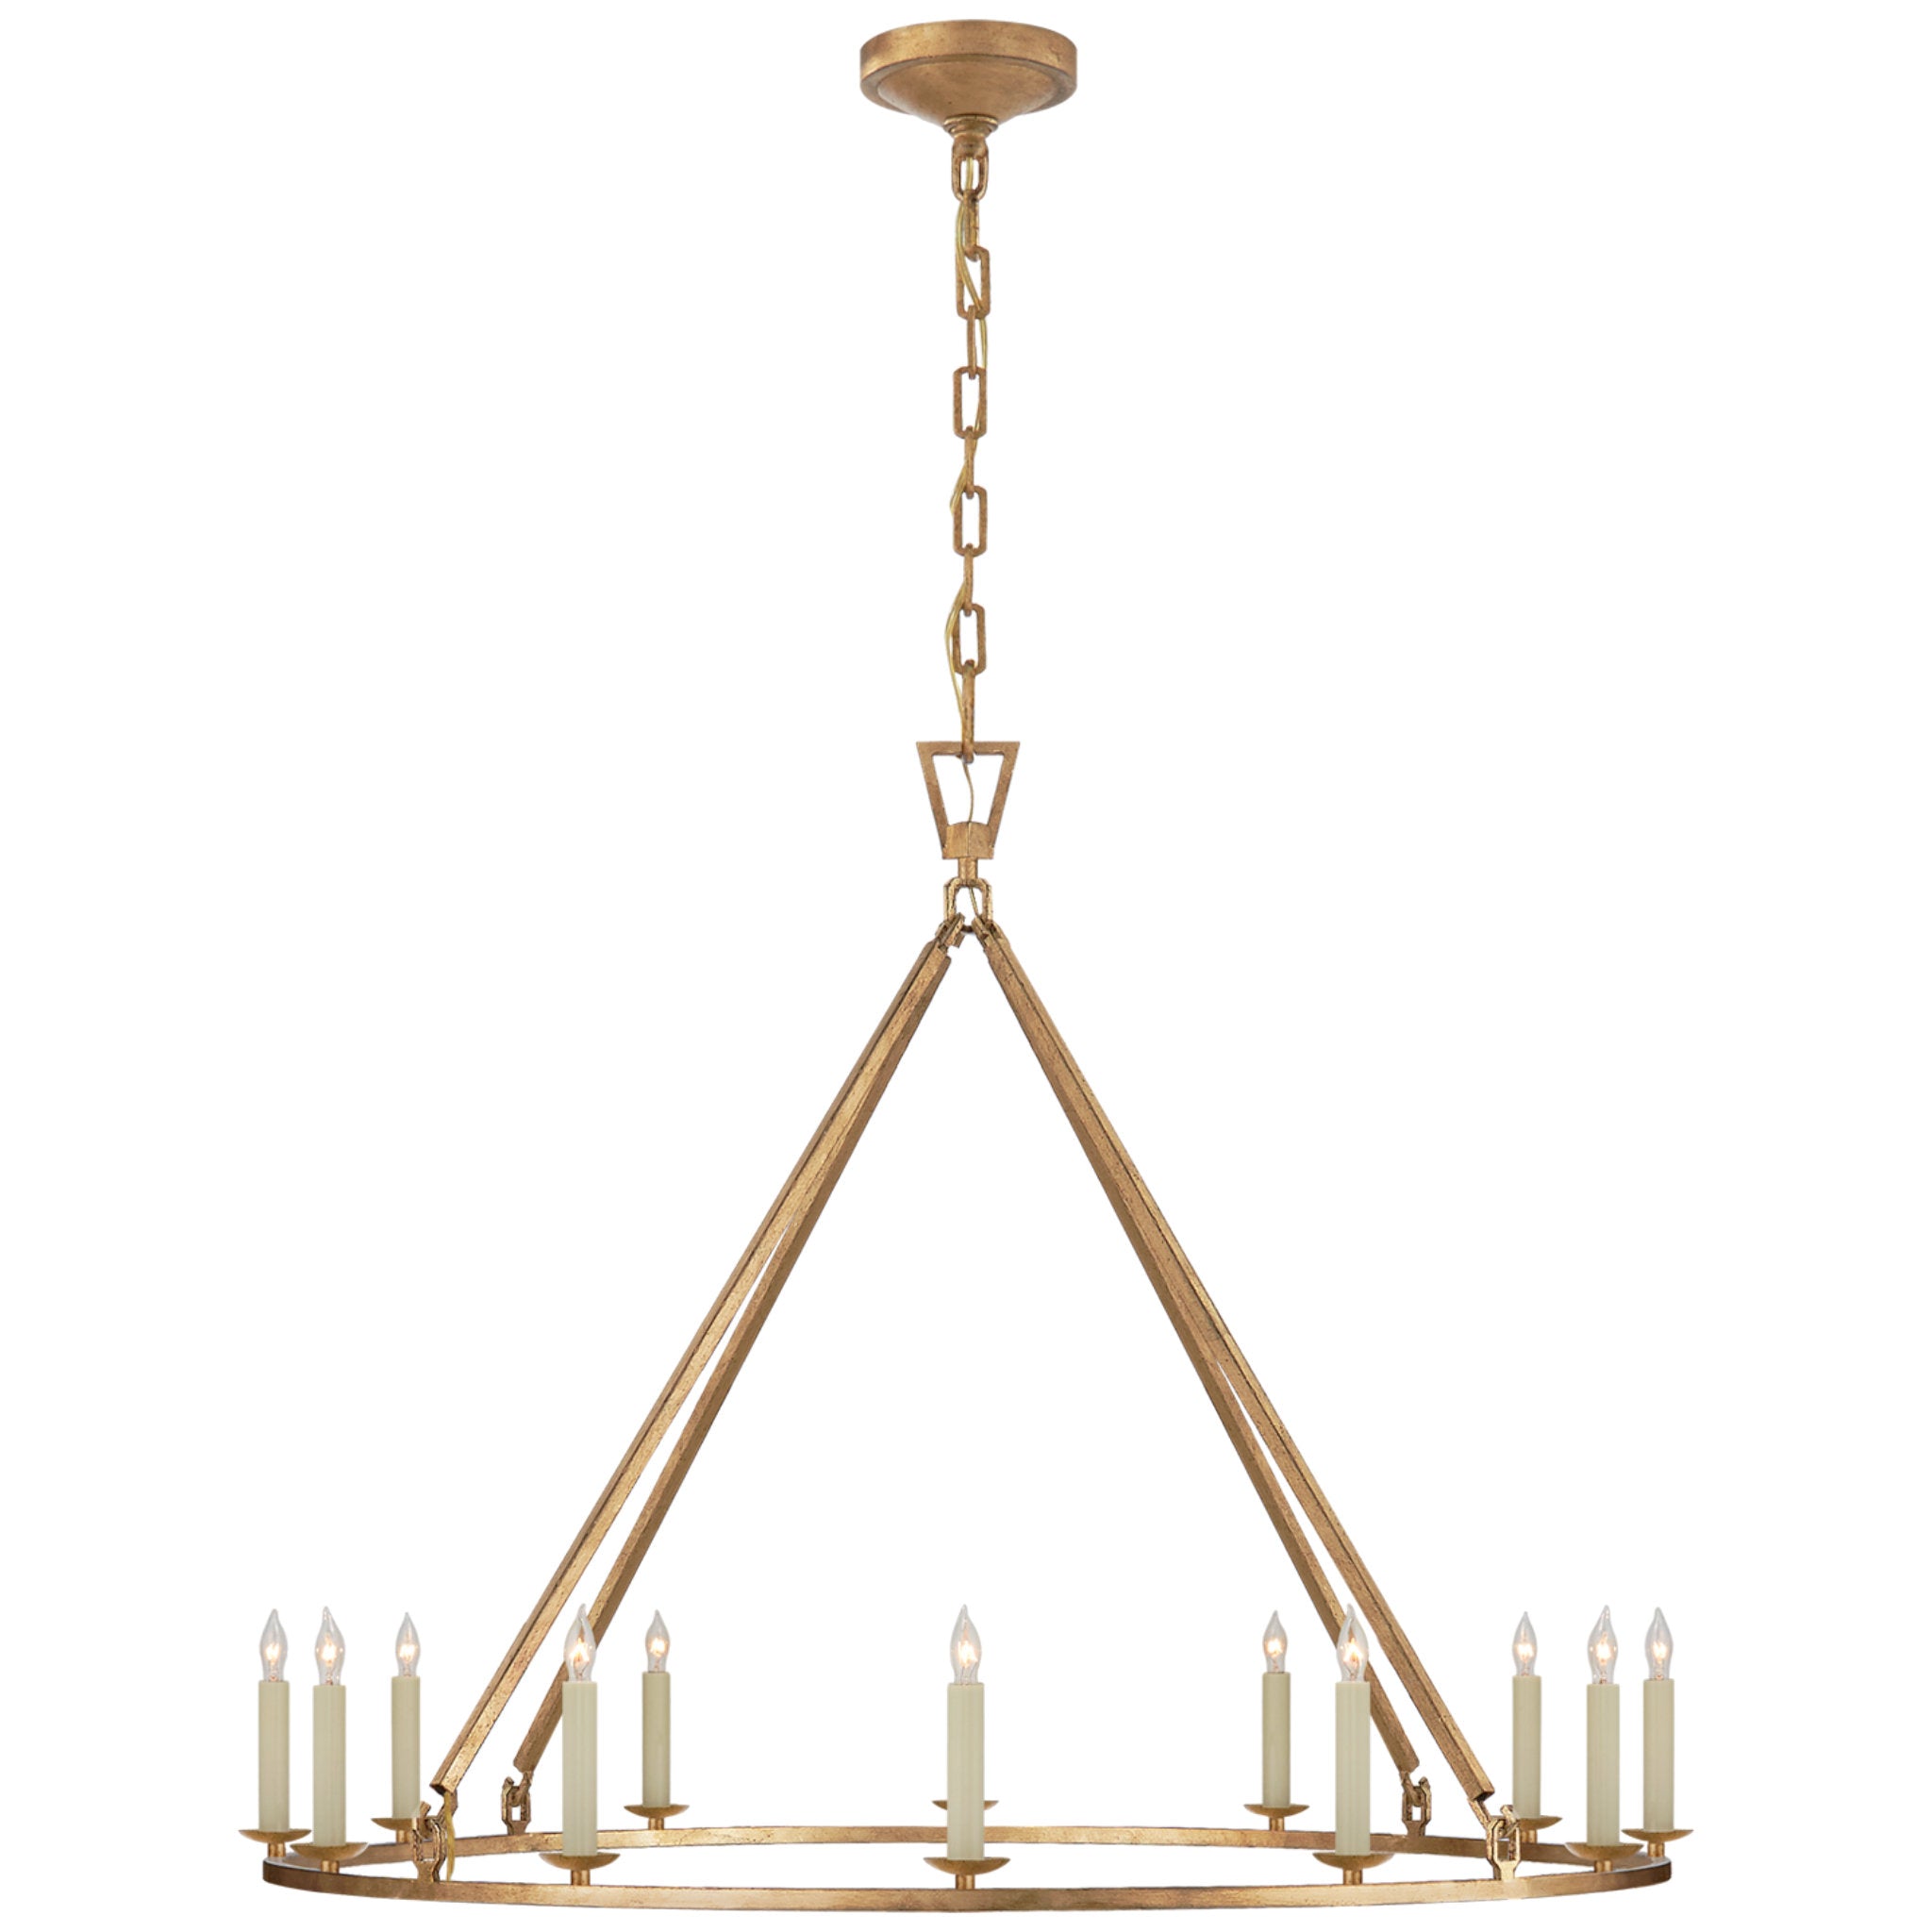 Chapman & Myers Darlana Large Single Ring Chandelier in Gilded Iron